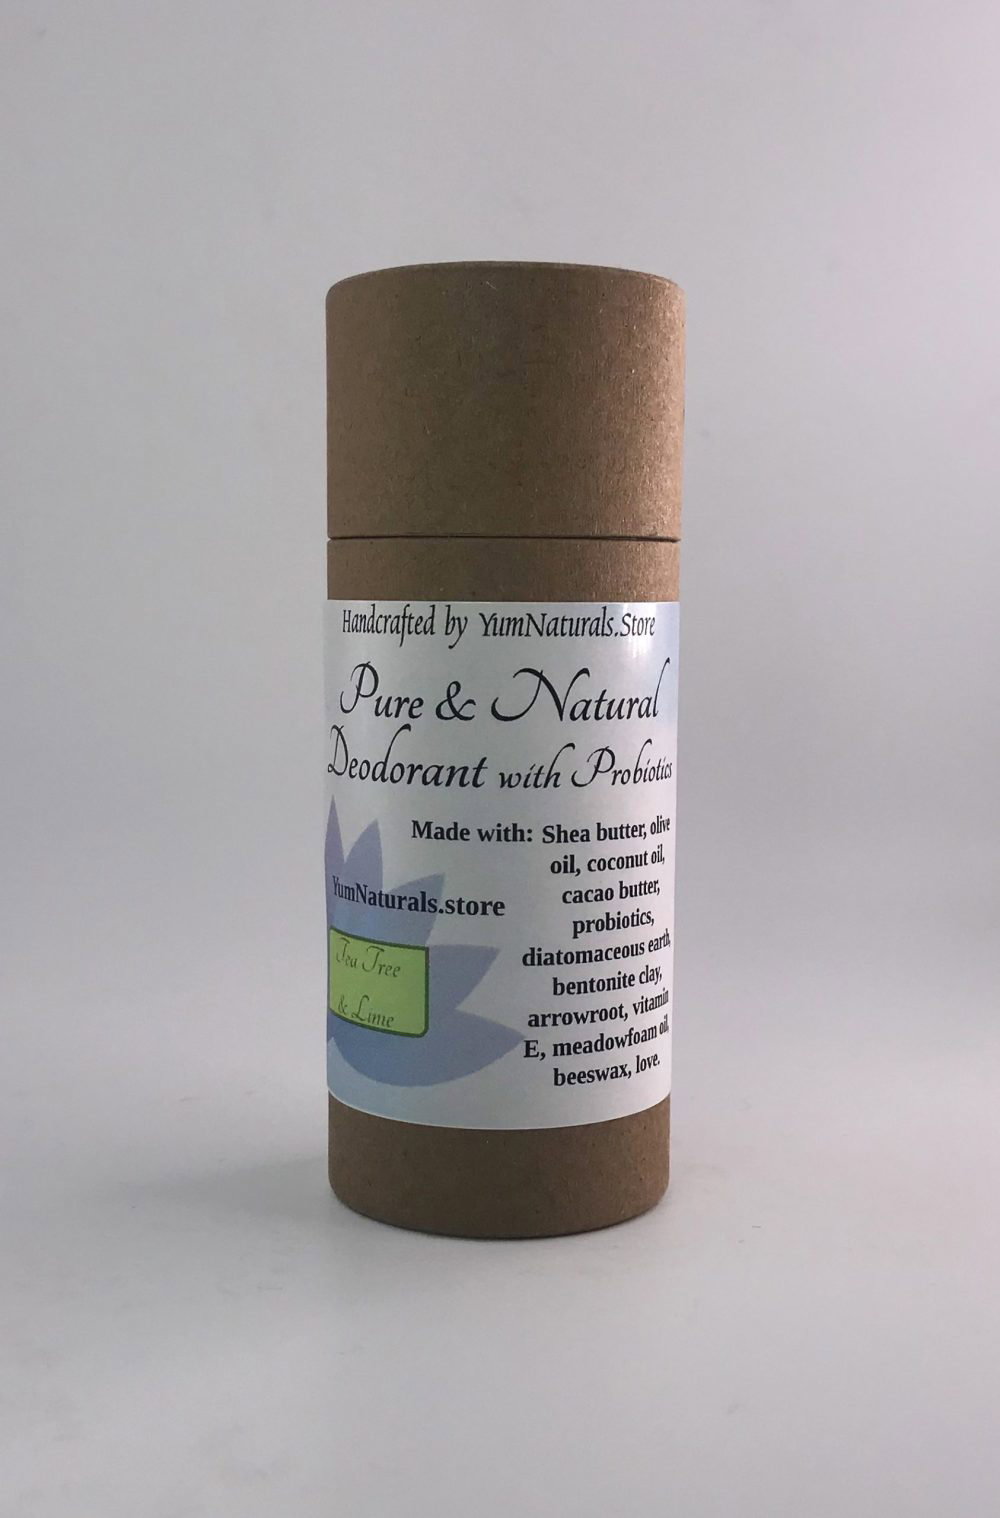 yum-naturals-pure-and-natural-deodorant-with-probiotics-tea-tree-lime-ecofriendly-cardboard-tube